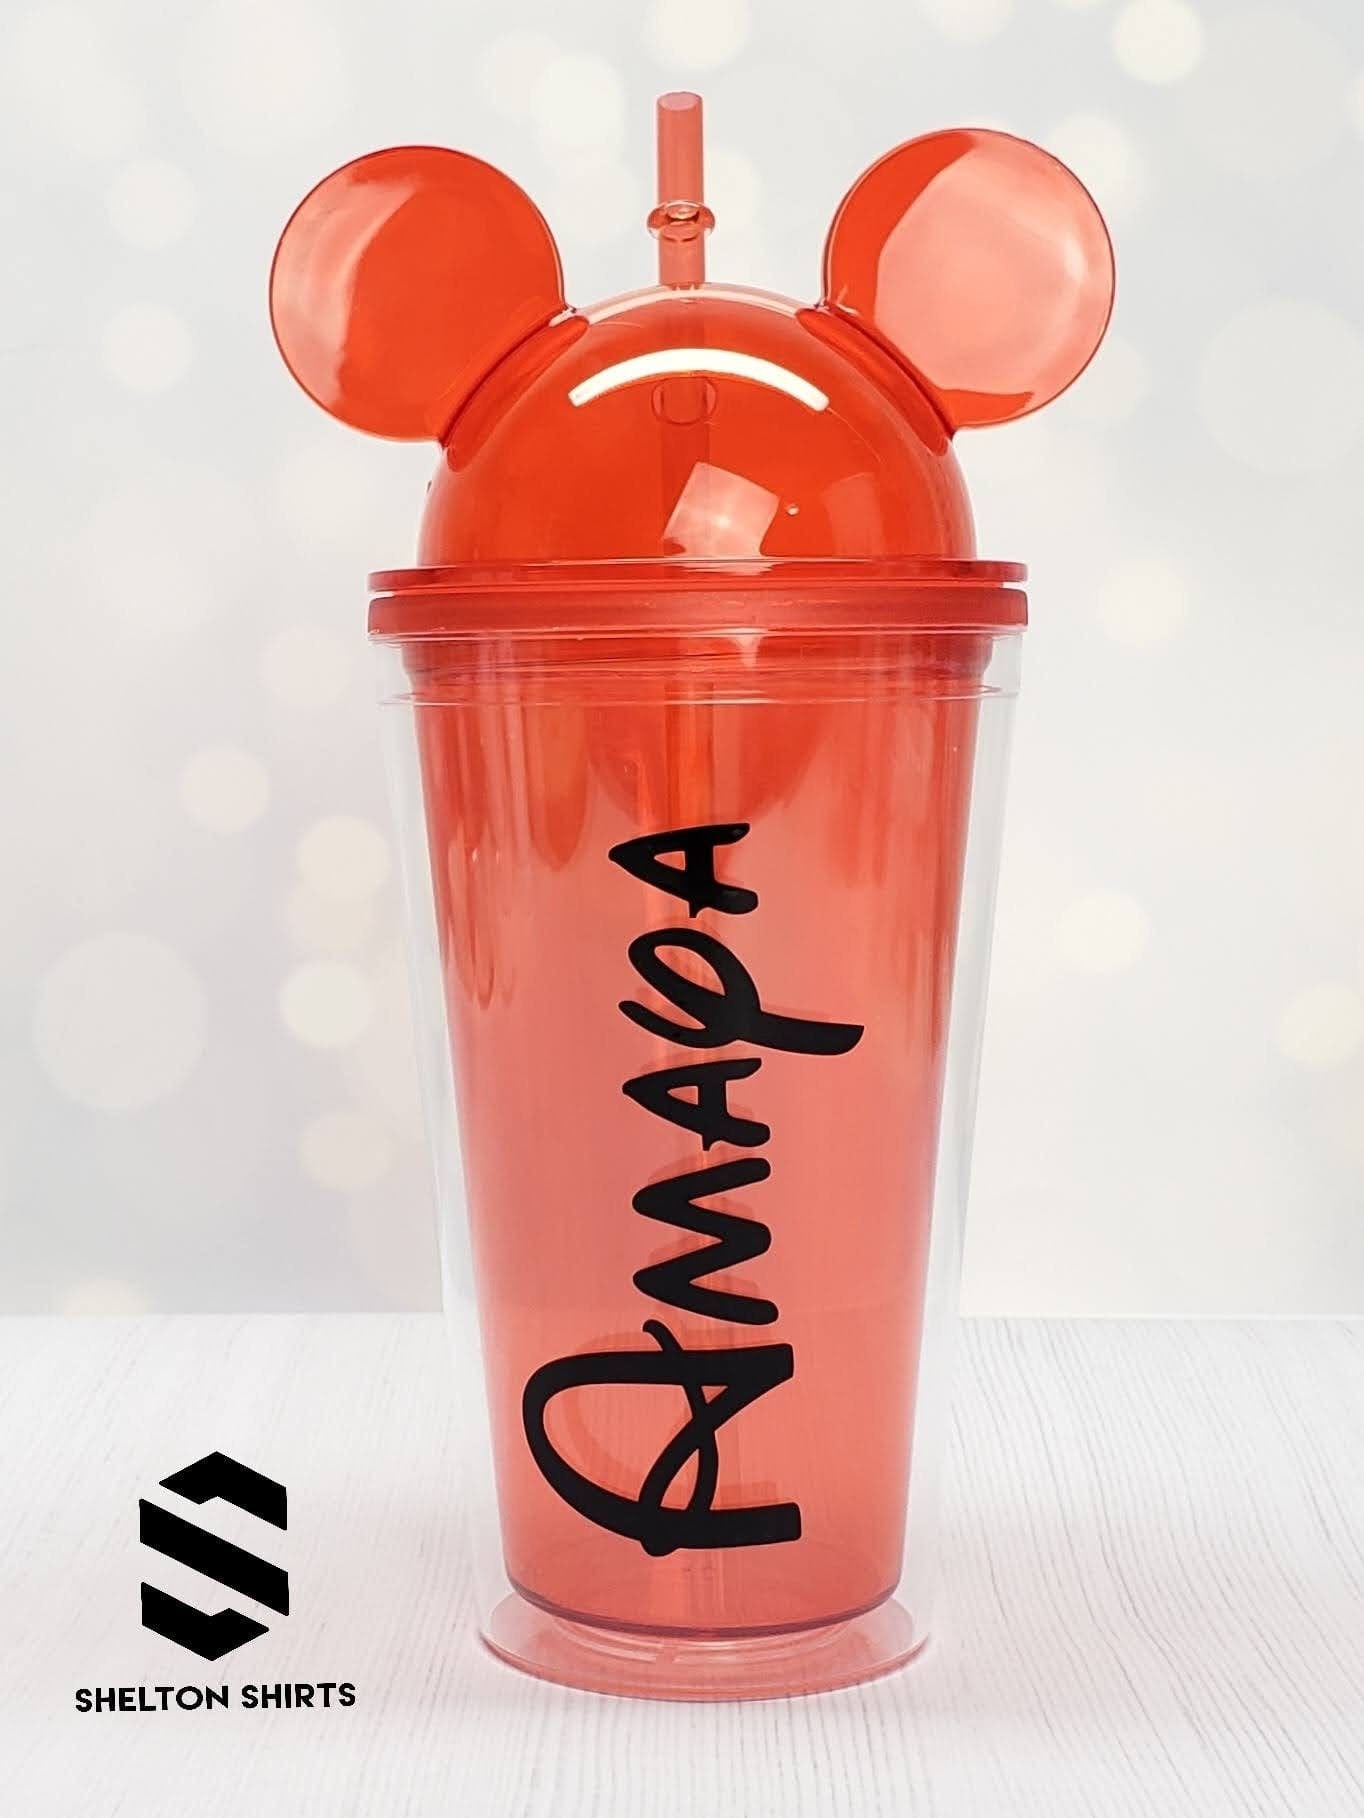 Mickey Mouse Ears Tumbler with Personalized Name Decal - Double